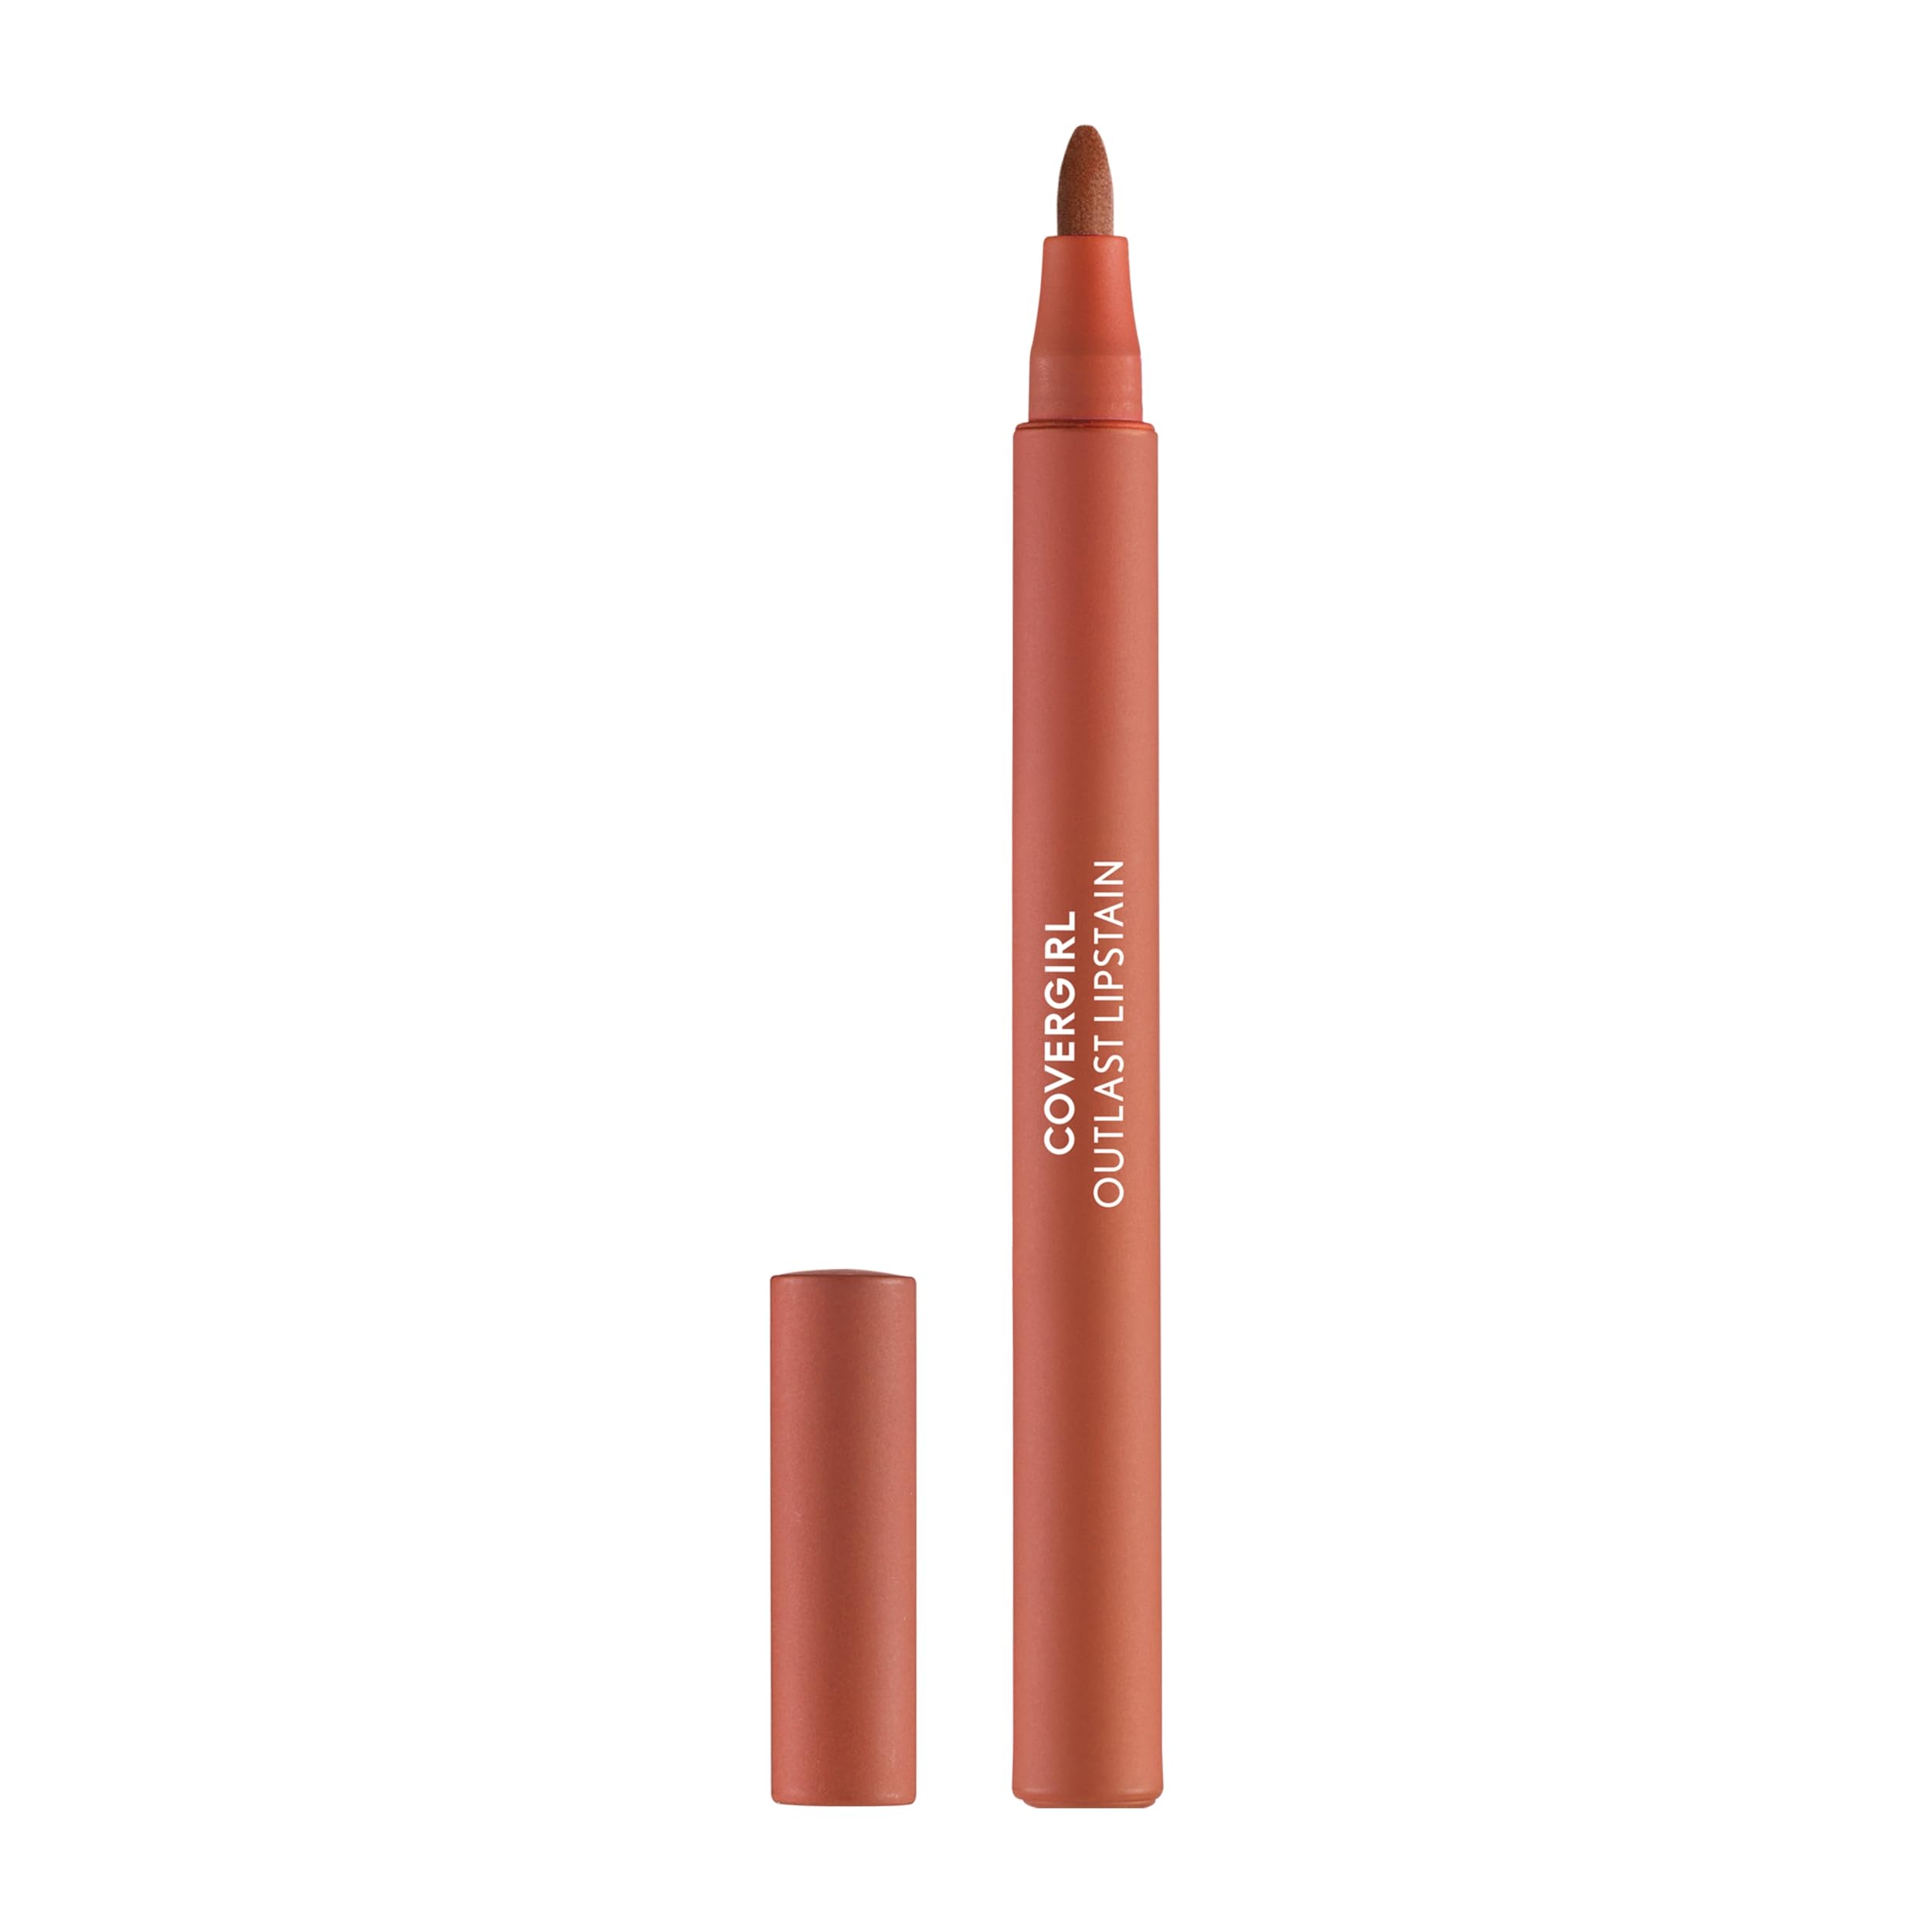 Covergirl Outlast, 35 Canyon, Lipstain, Smooth Application, Precise Pen-Like Tip, Transfer-Proof, Satin Stained Finish, Vegan Formula, 0.06oz